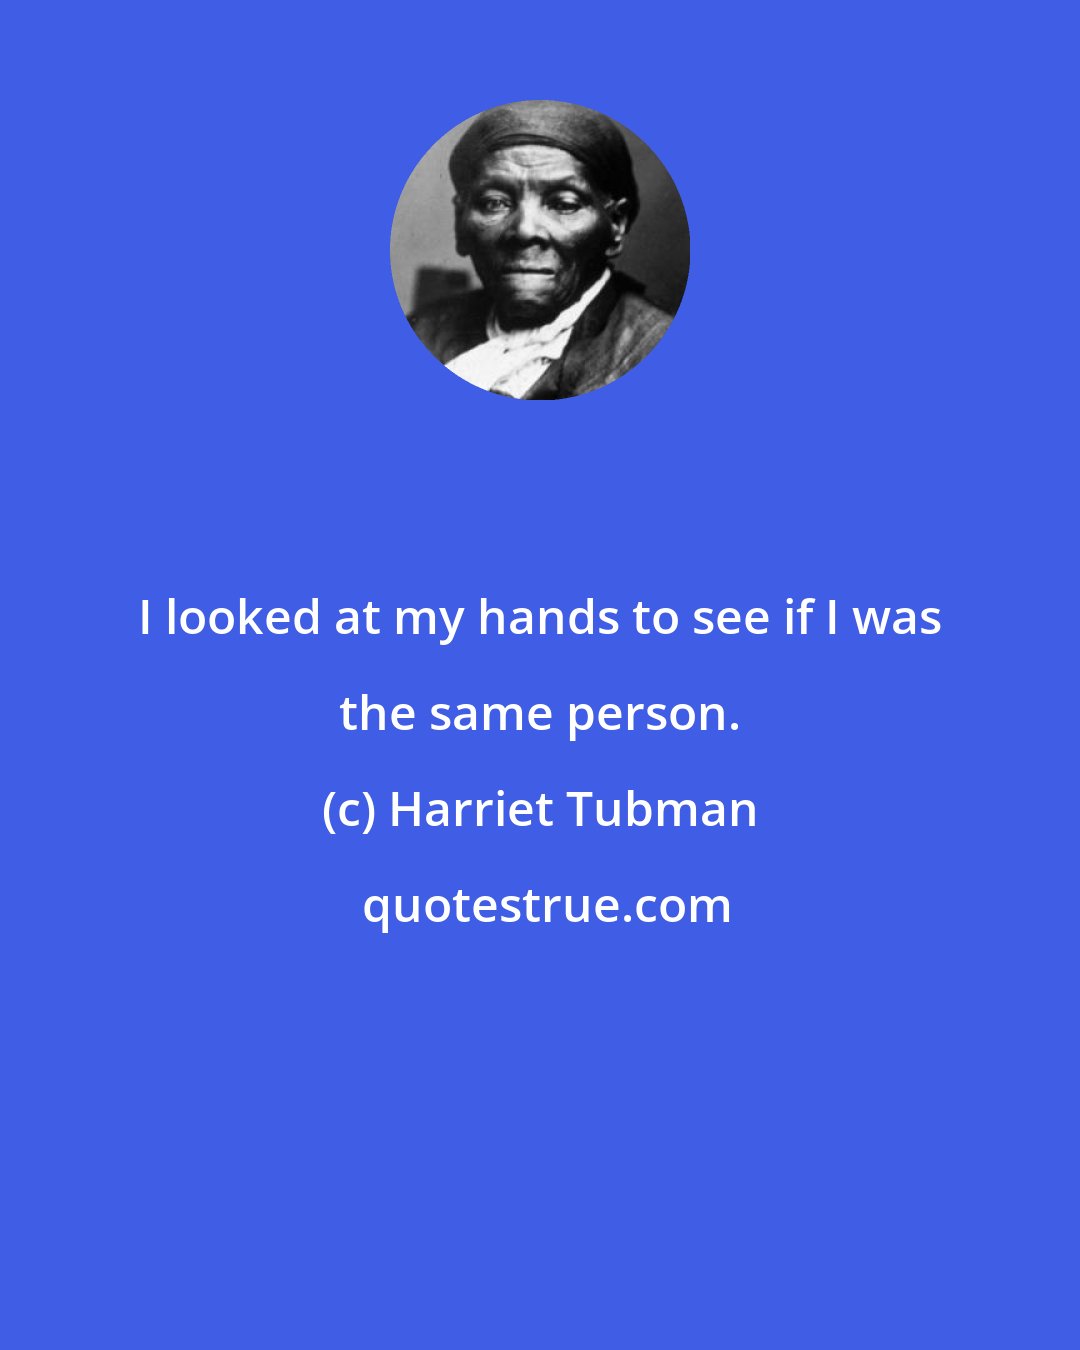 Harriet Tubman: I looked at my hands to see if I was the same person.